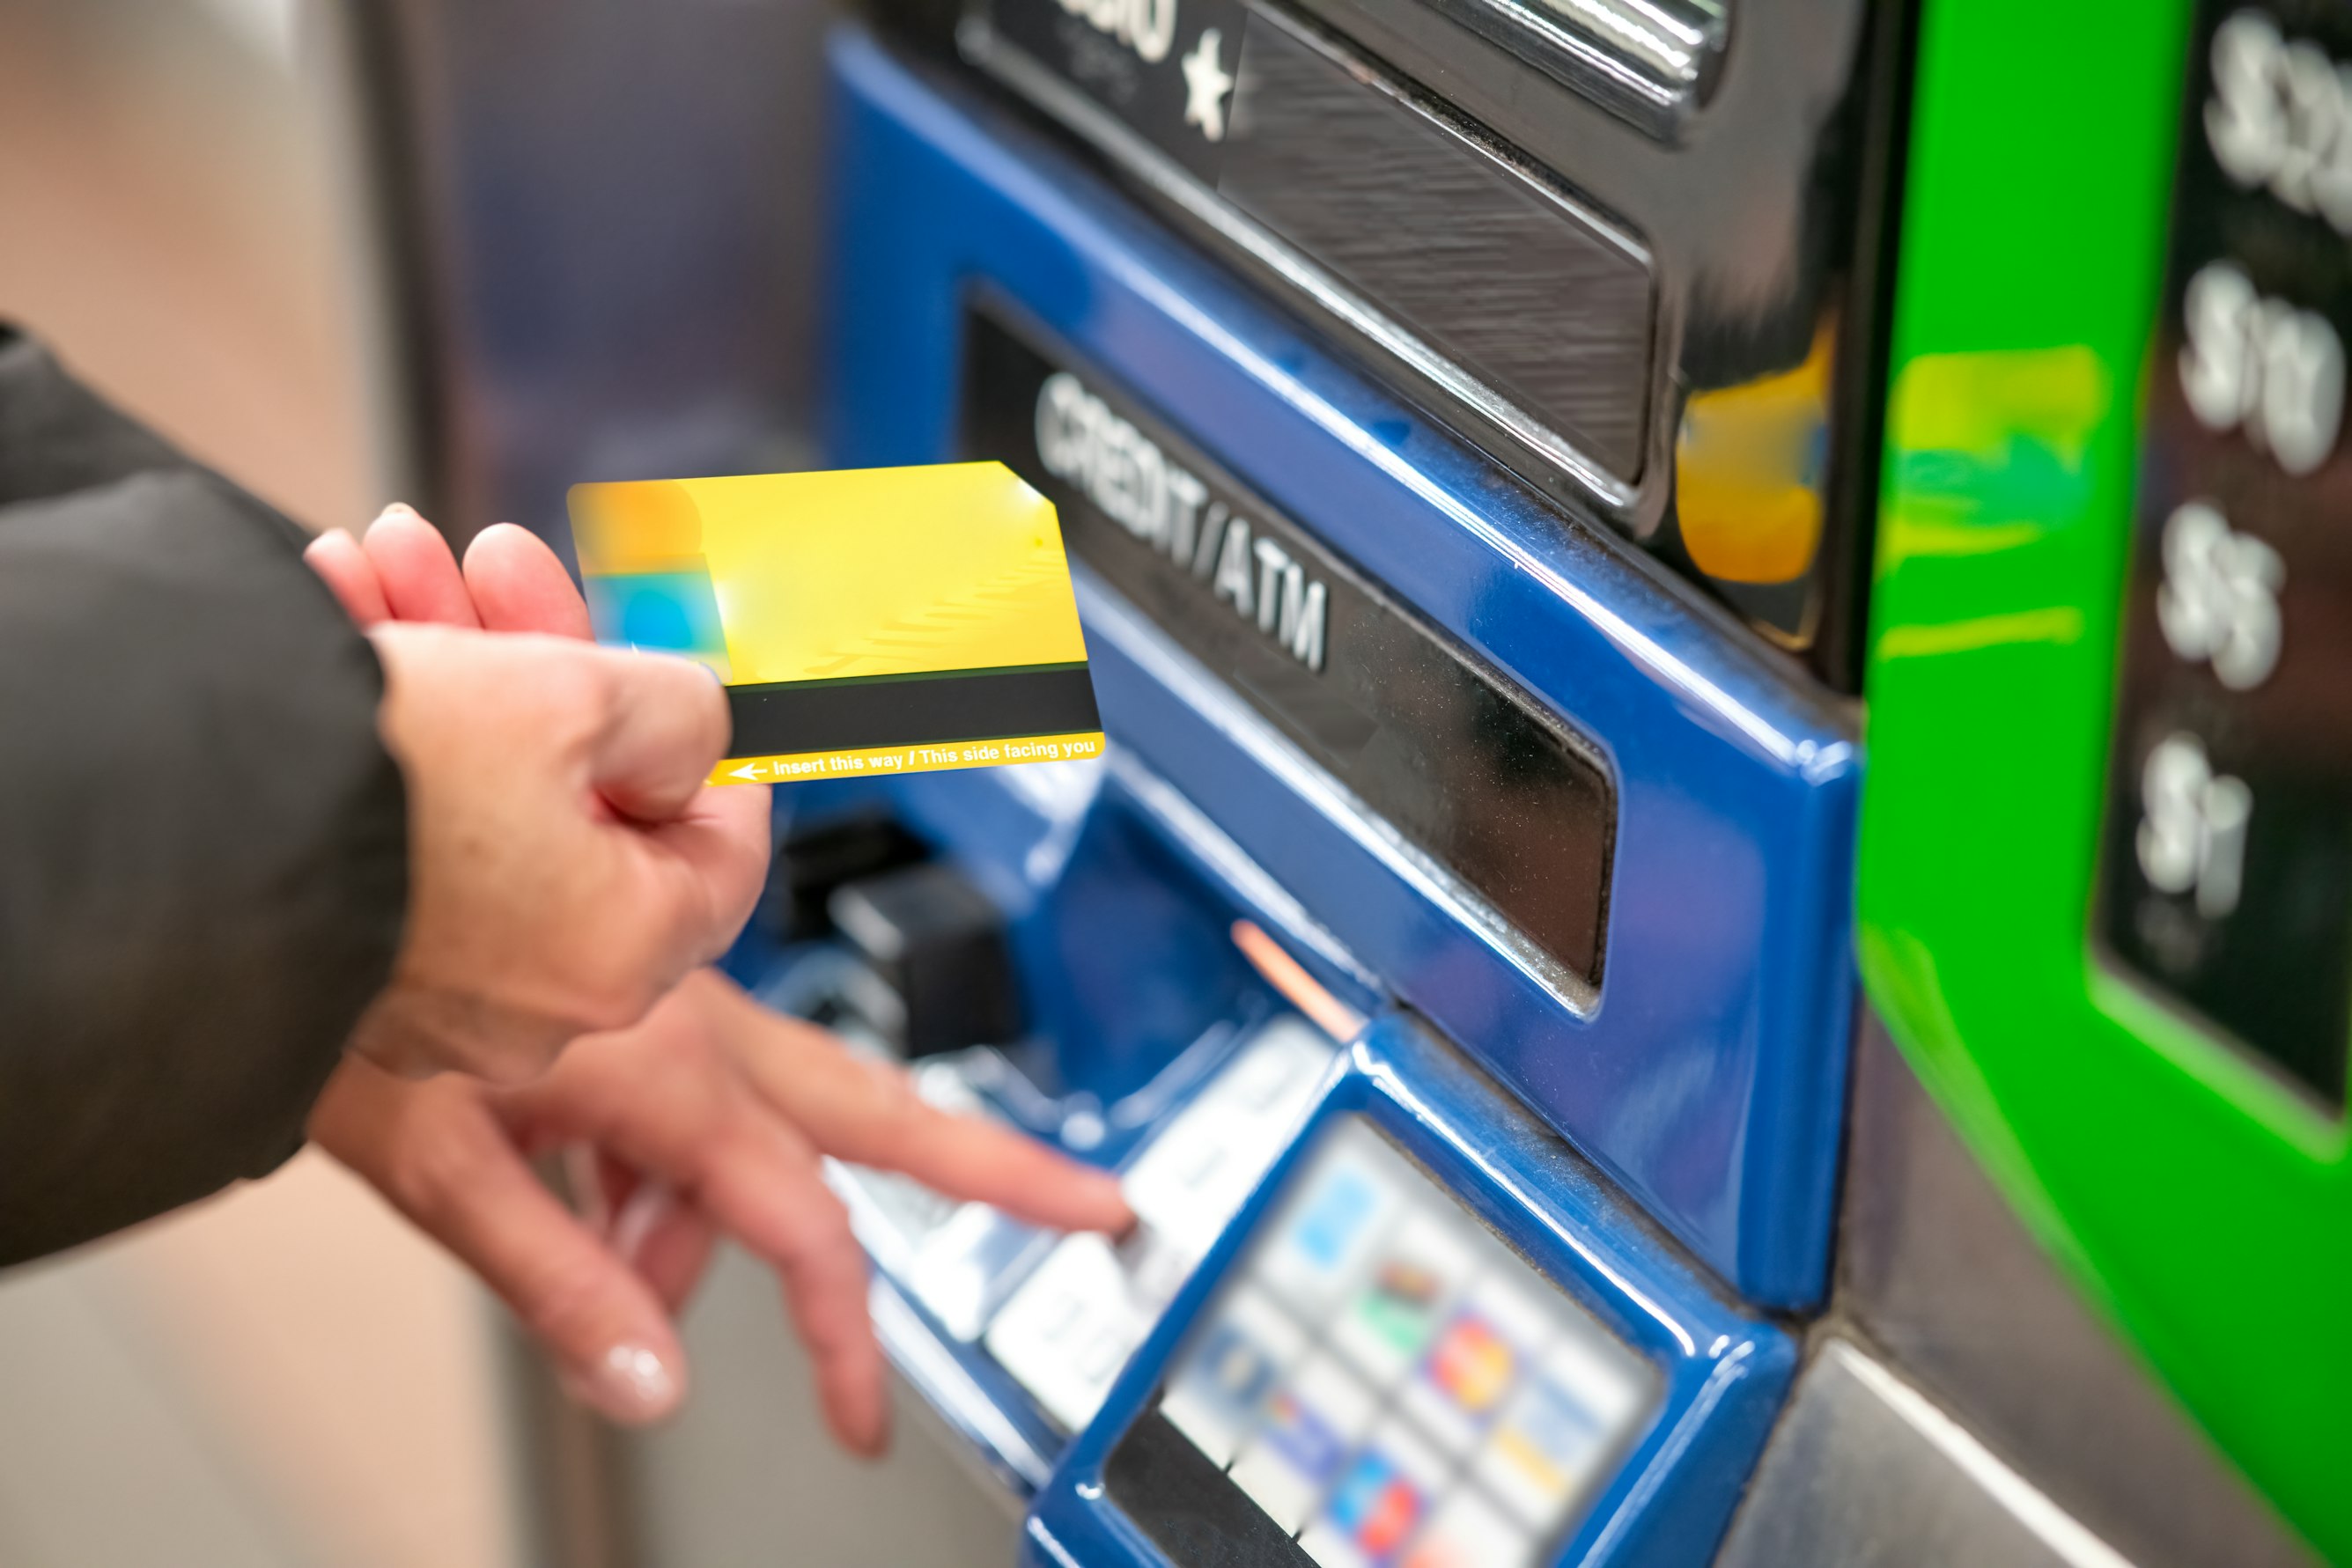 A New User Interface Concept for ATM’s to Reduce Receipt Wastage